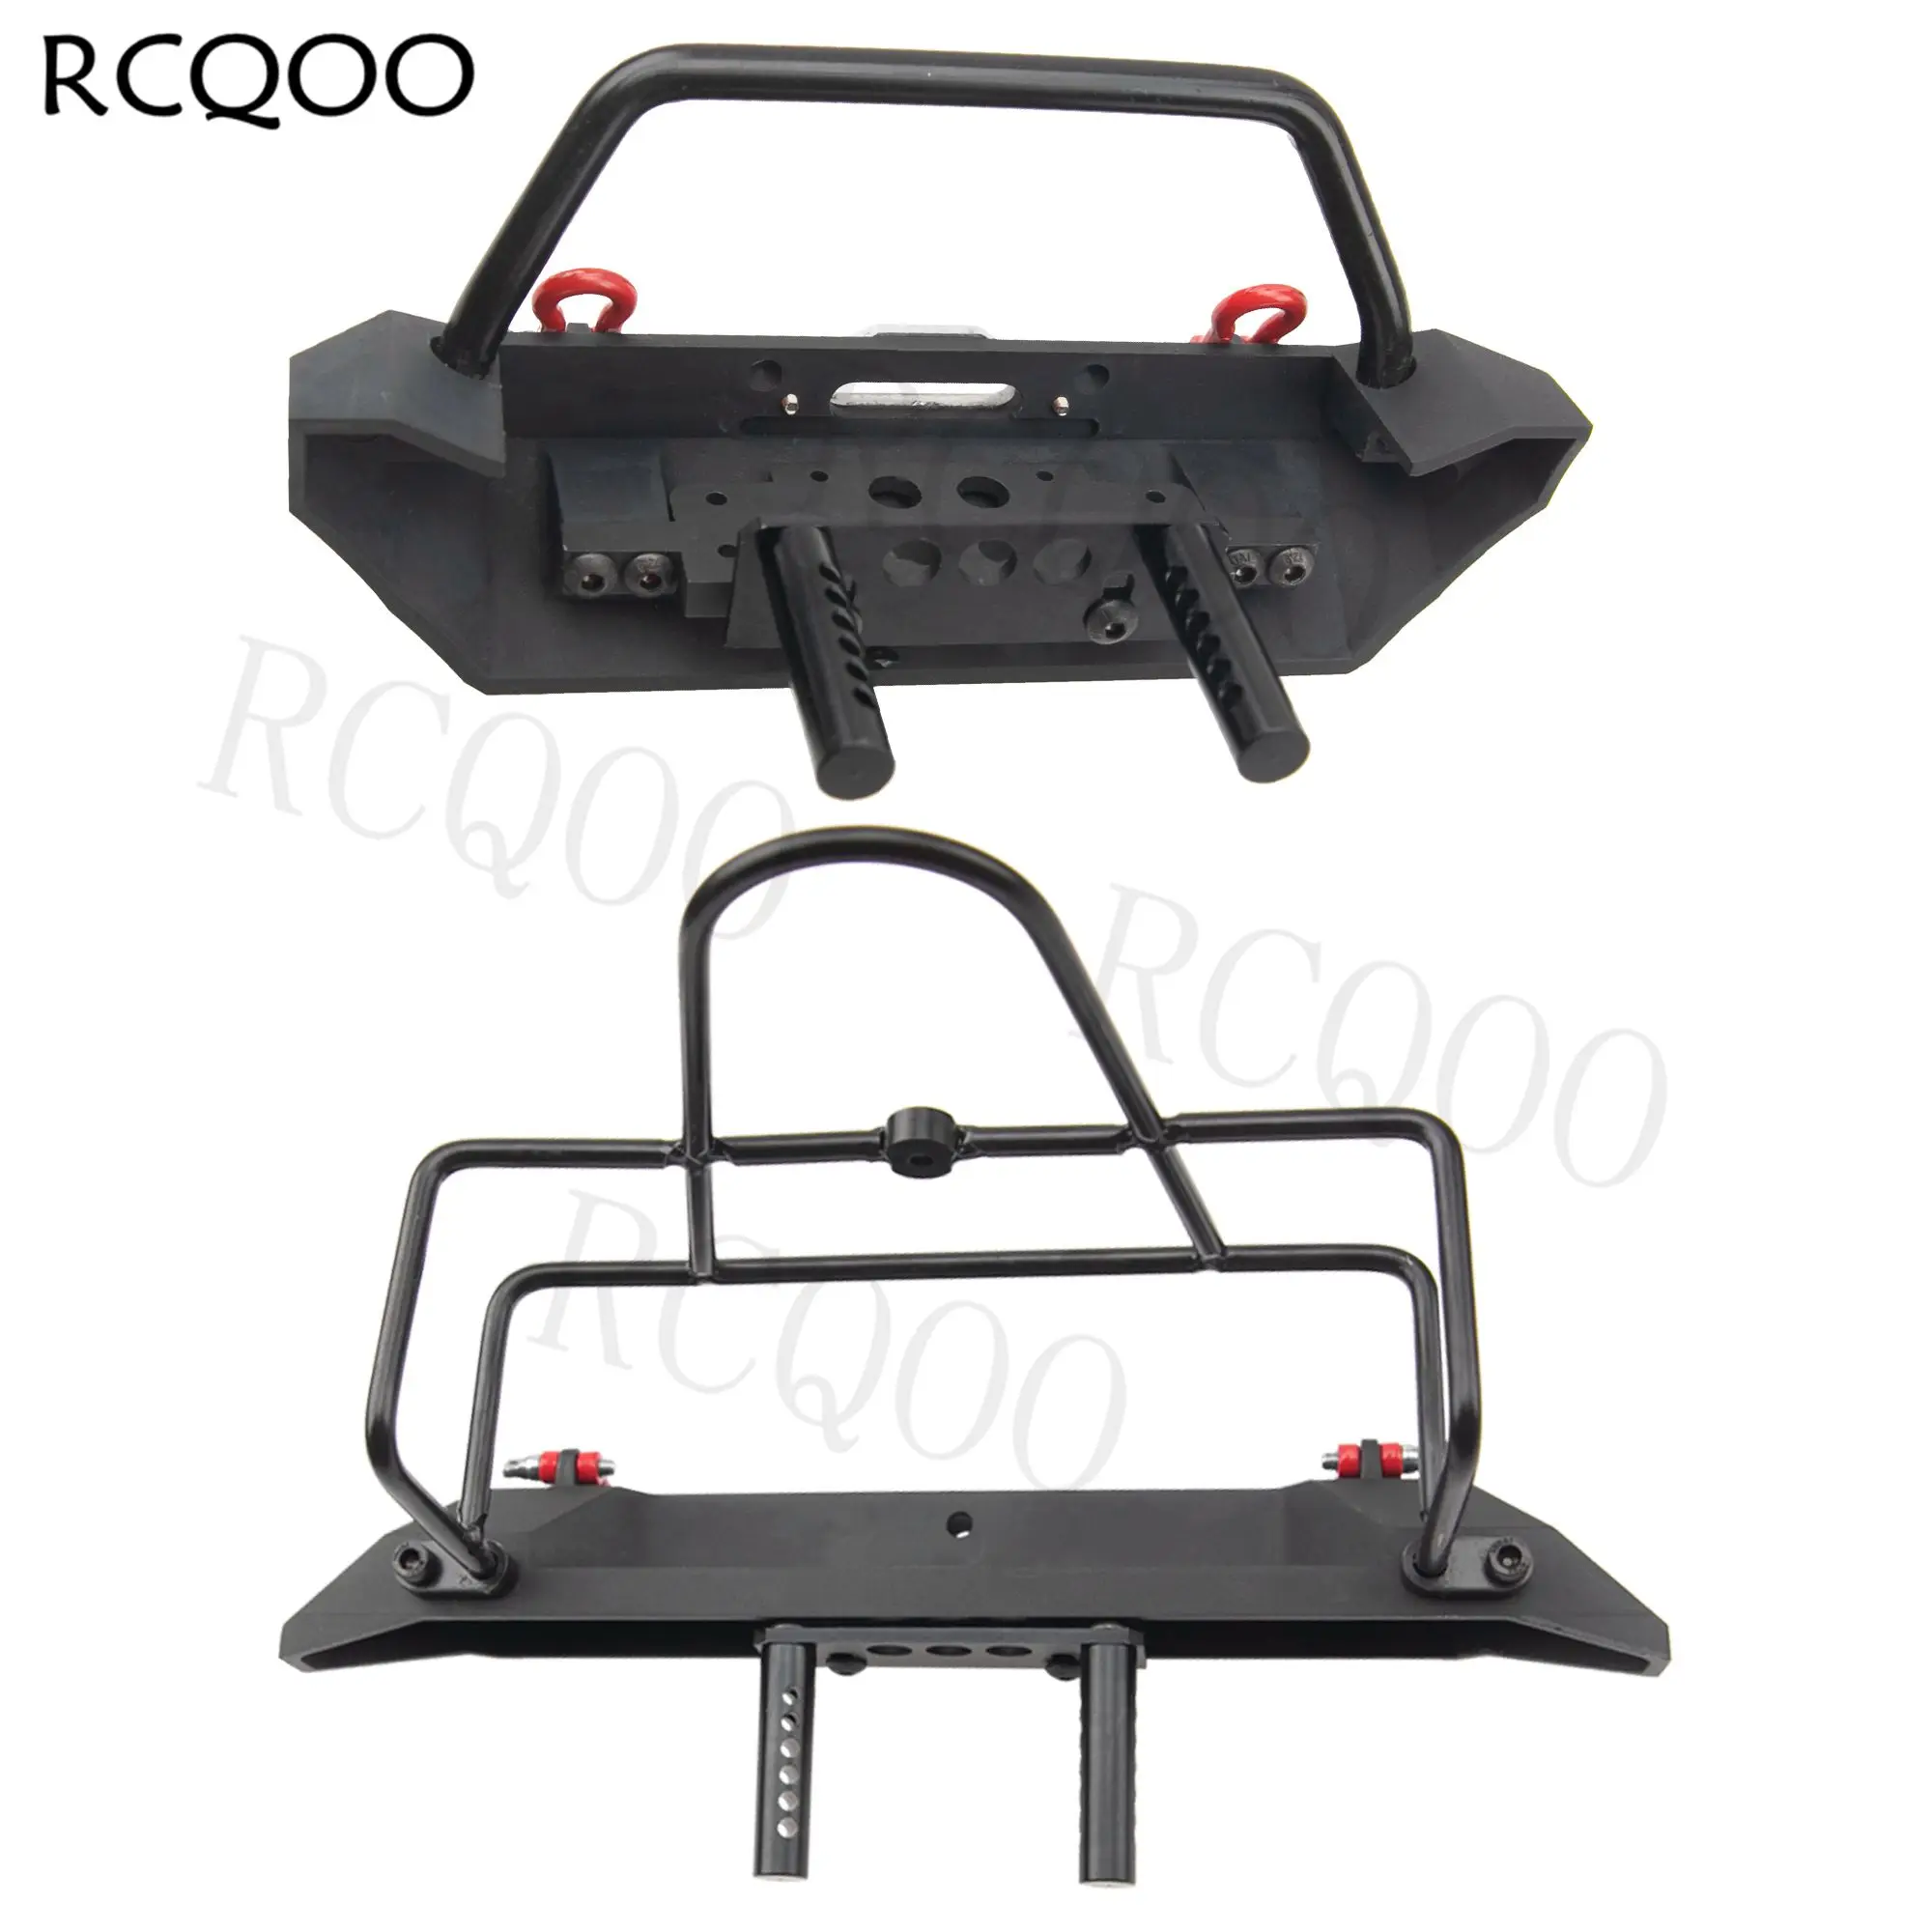 

Metal Bumper with Tow Trailer Compatible with Axial SCX10 90046 90047 Traxxas TRX-4 Redcat Gen8 1/10 RC Crawler Car